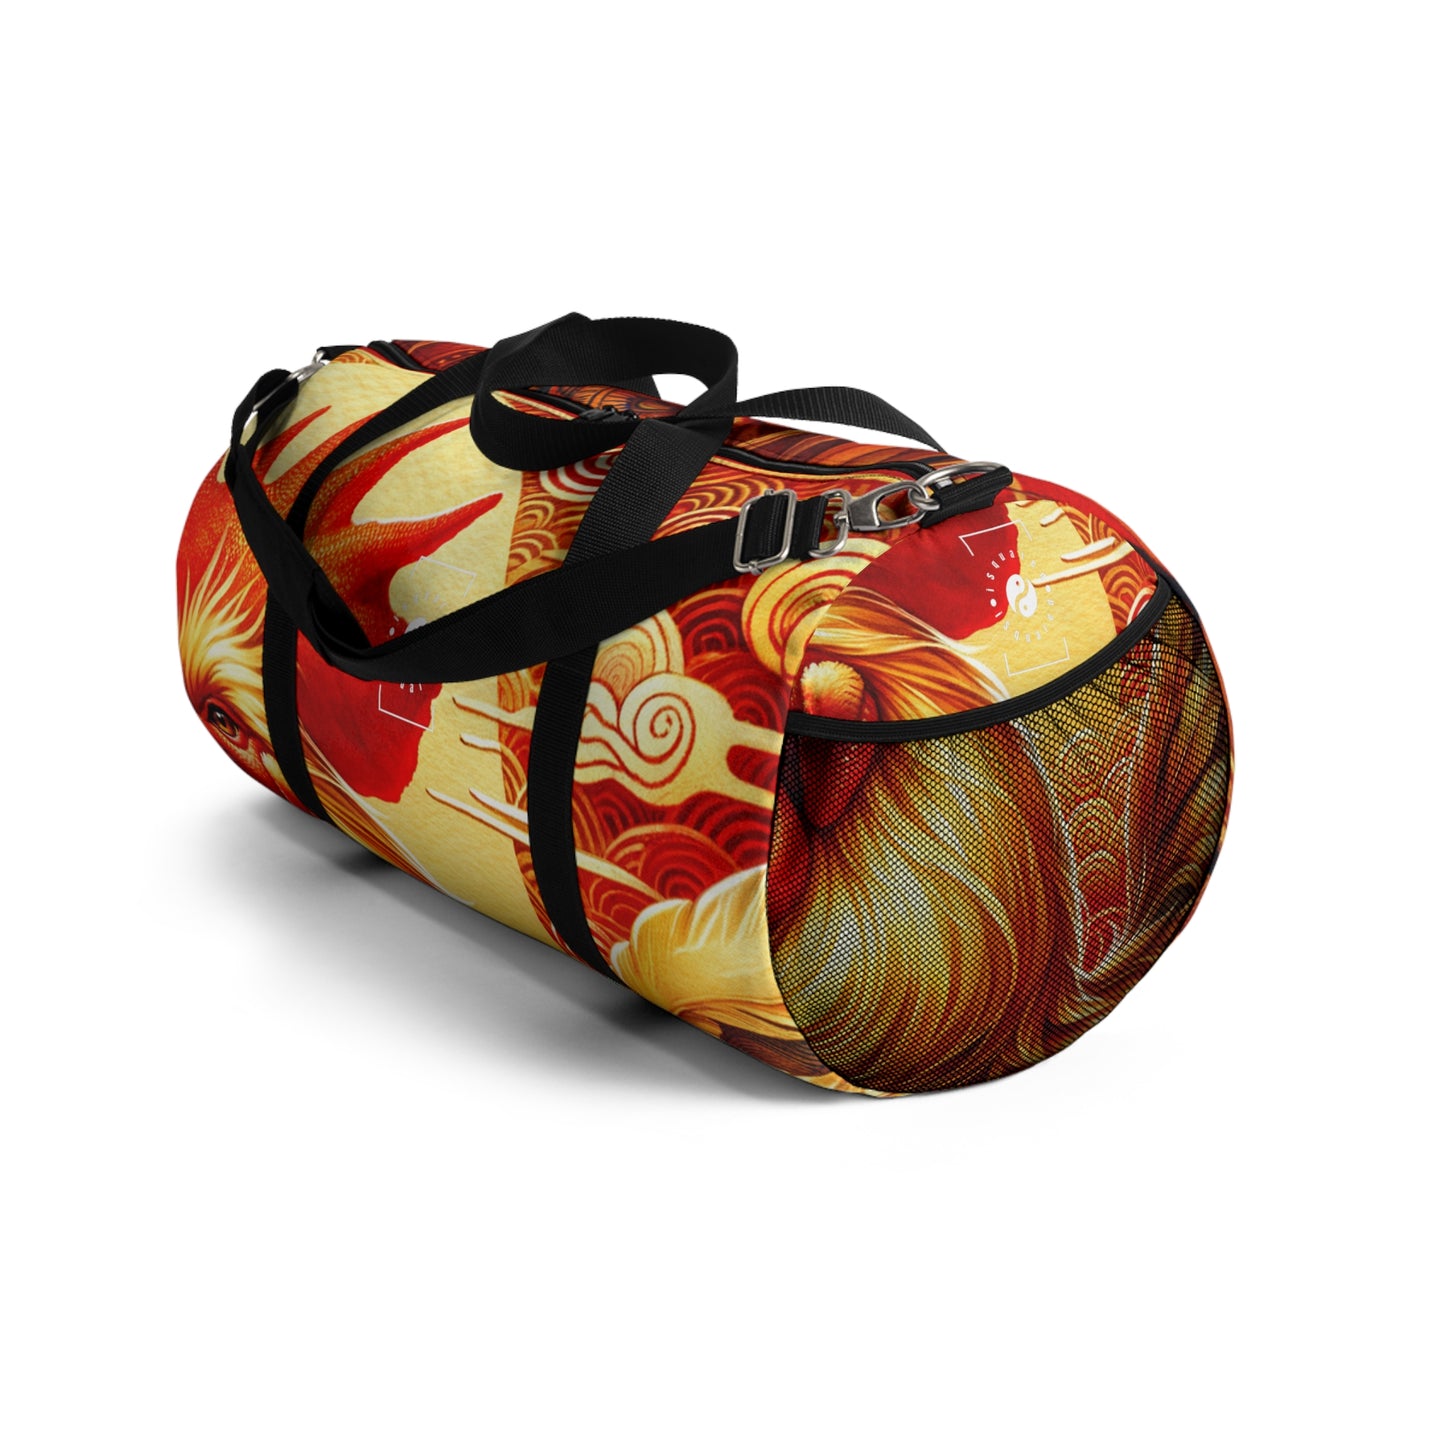 "Crimson Dawn: The Golden Rooster's Rebirth" - Duffle Bag